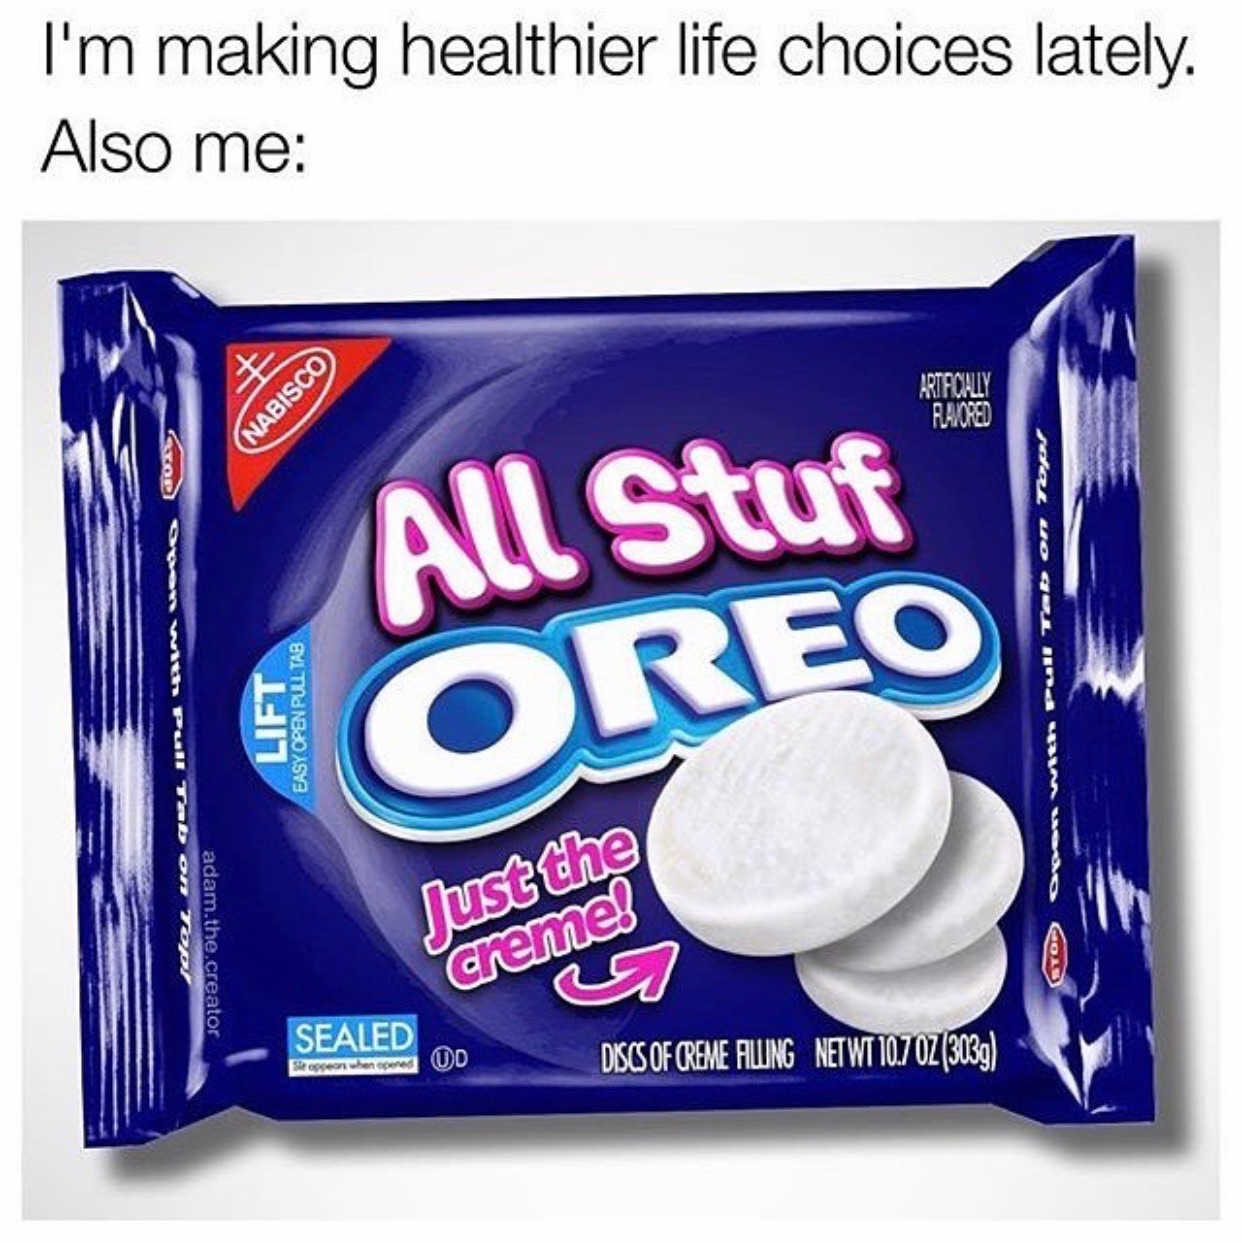 memes - oreo memes - I'm making healthier life choices lately. Also me Nabisco Artifically Ramored CODOn with Pun Ta Pull Tabon 10 adam.the.creator All Stuf Goreo Lift Easy Open Pulltas der wo au mna mudo co Just the creme? Sealed Discs Of Creme Aling Net